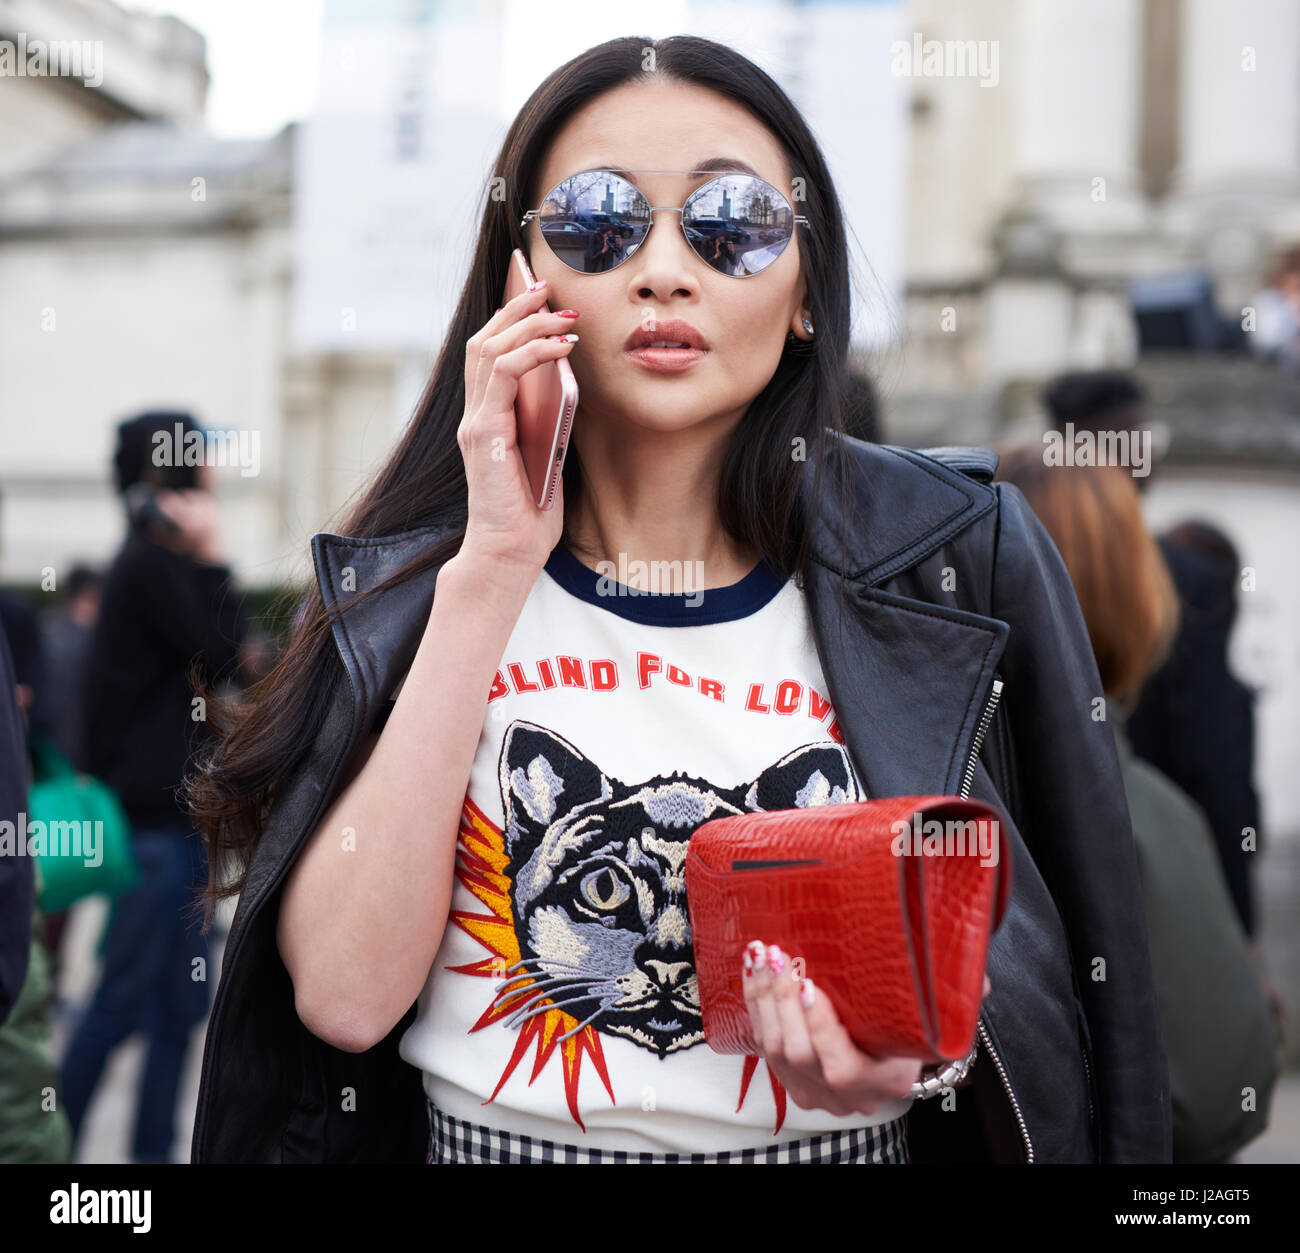 LONDON - FEBRUARY, 2017: Waist up view of woman wearing Gucci top and leather jacket, holding Hermes purse, using phone outside Christopher Kane fashion show, London Fashion Week, day four. Stock Photo